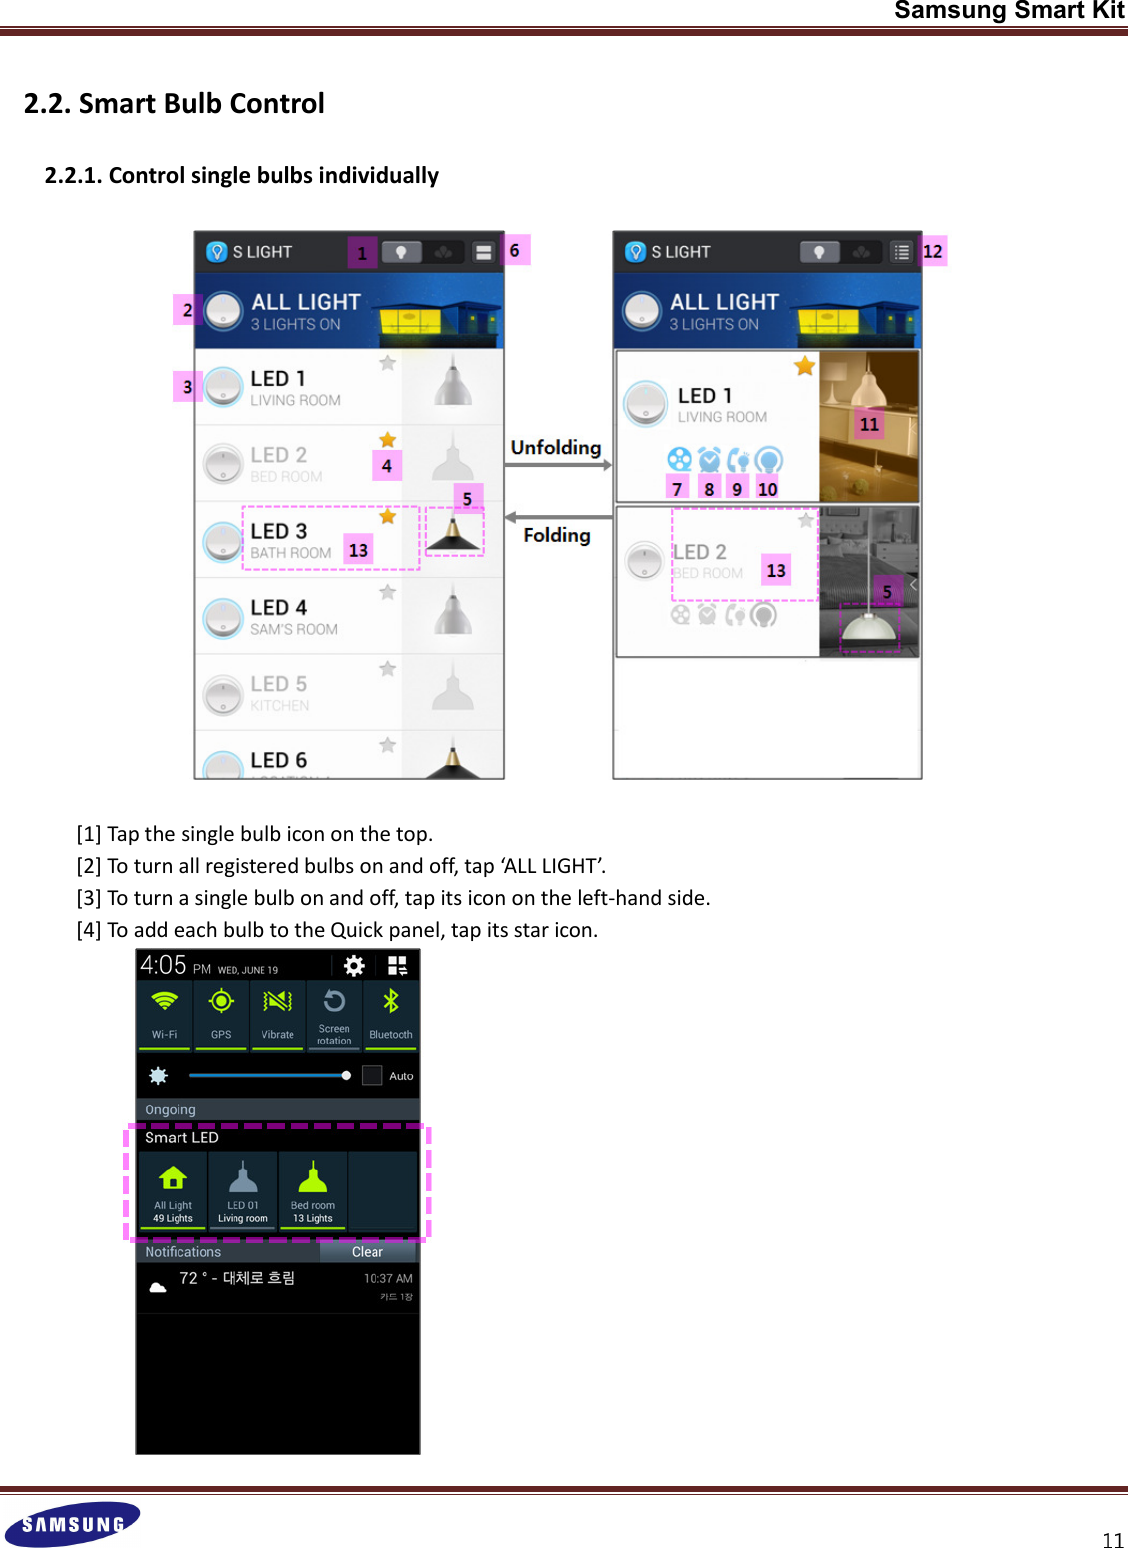 Samsung Smart Kit  2.2. Smart Bulb Control  2.2.1. Control single bulbs individually    [1] Tap the single bulb icon on the top. [2] To turn all registered bulbs on and off, tap ‘ALL LIGHT’. [3] To turn a single bulb on and off, tap its icon on the left-hand side. [4] To add each bulb to the Quick panel, tap its star icon.  